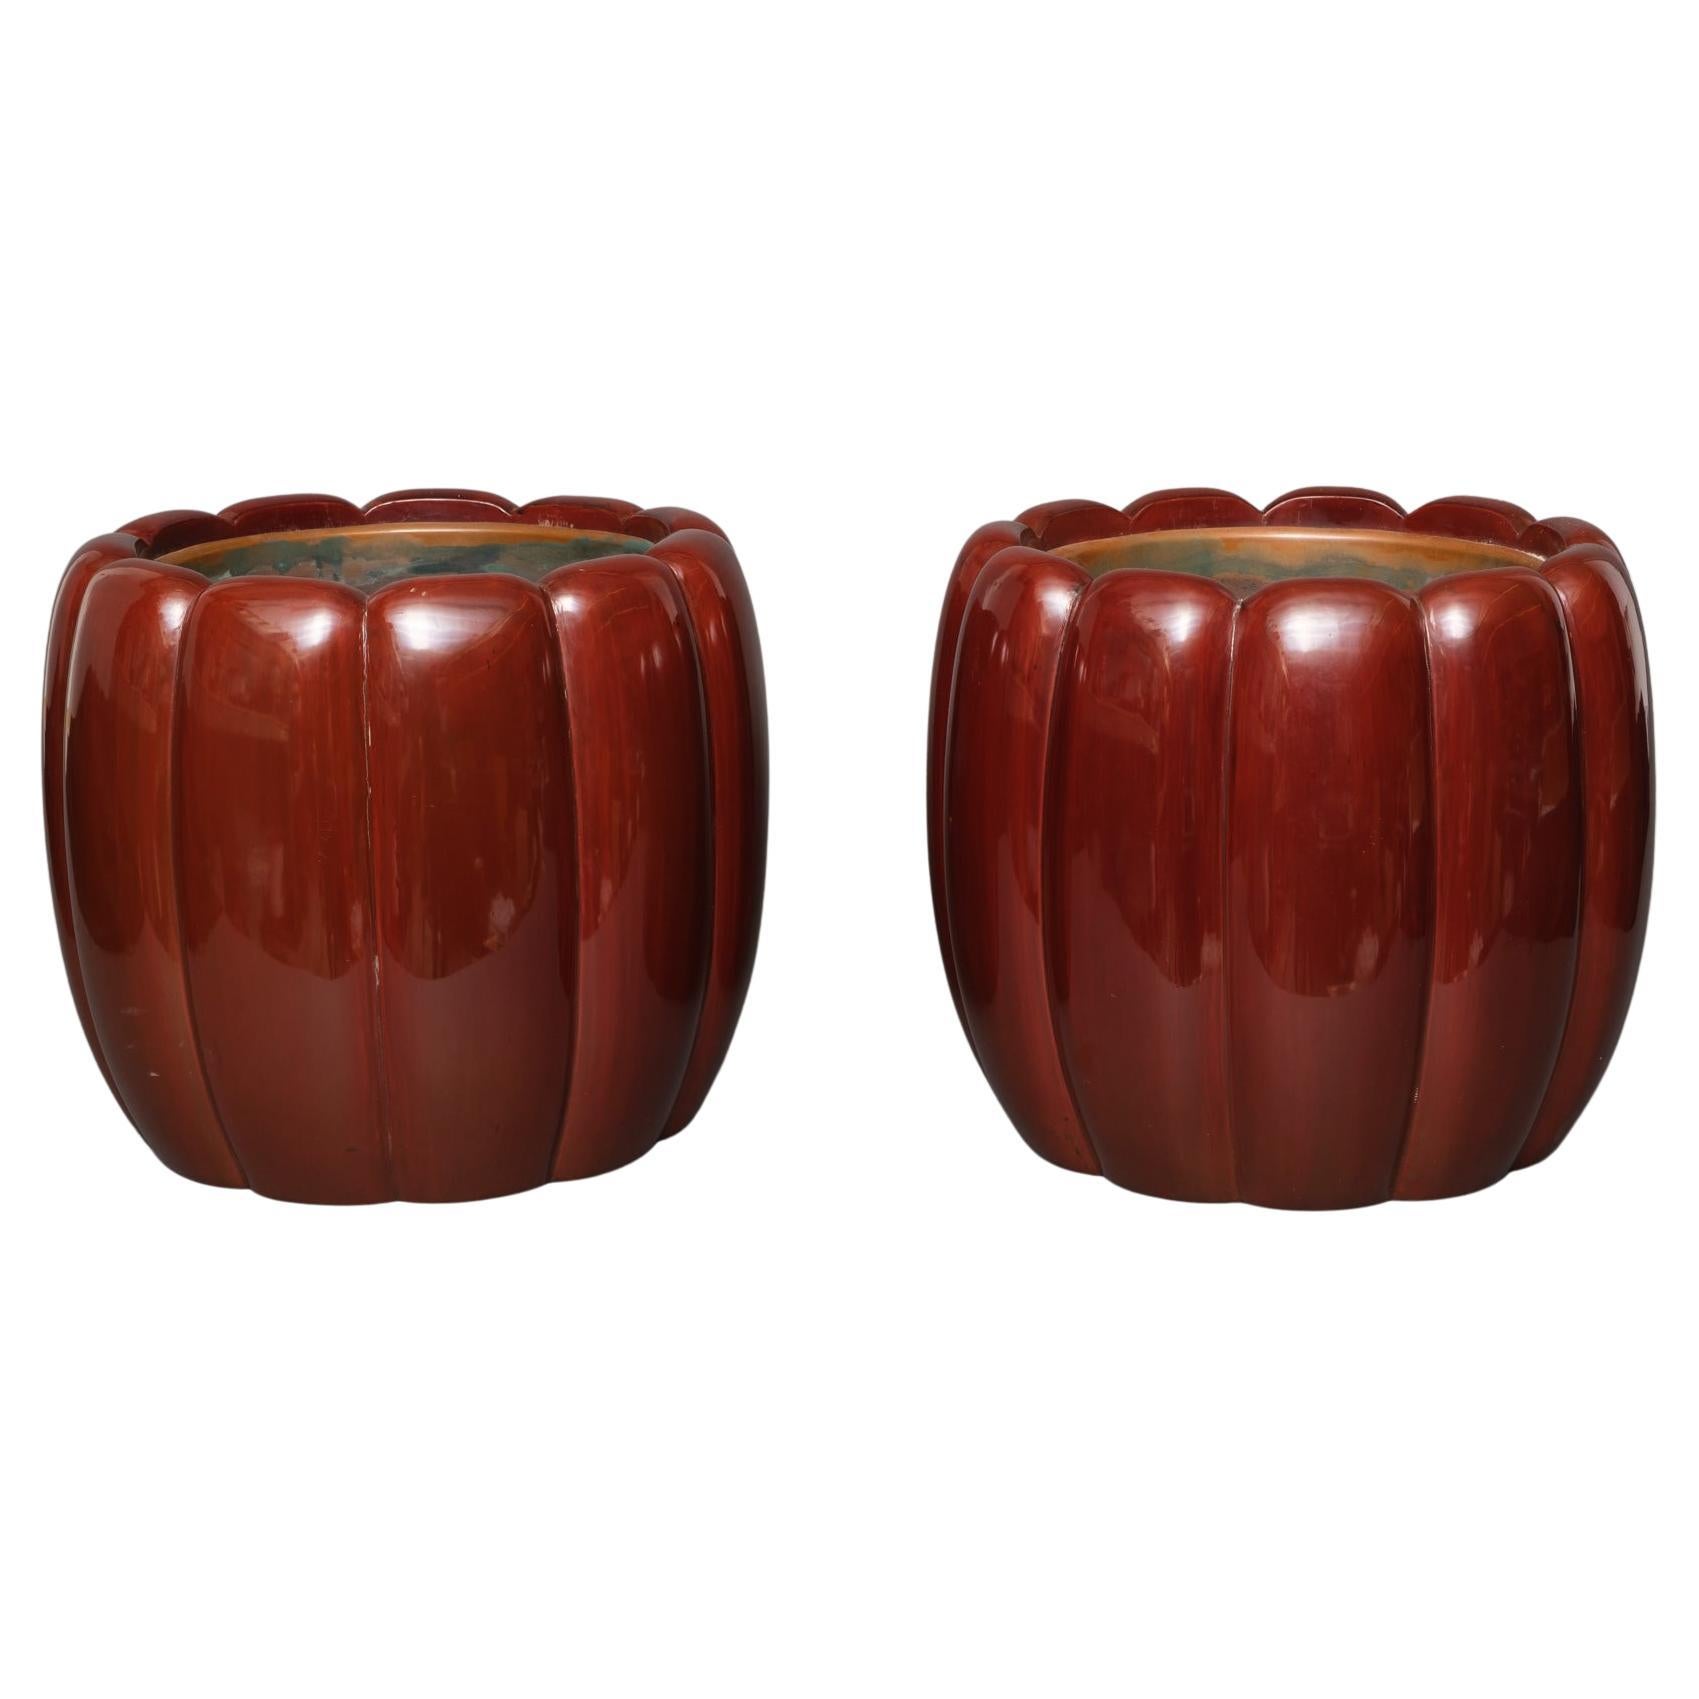 Pair of Japanese Red Lacquered Hibachi 火鉢 'Fire Bowls' Shaped like Flowers